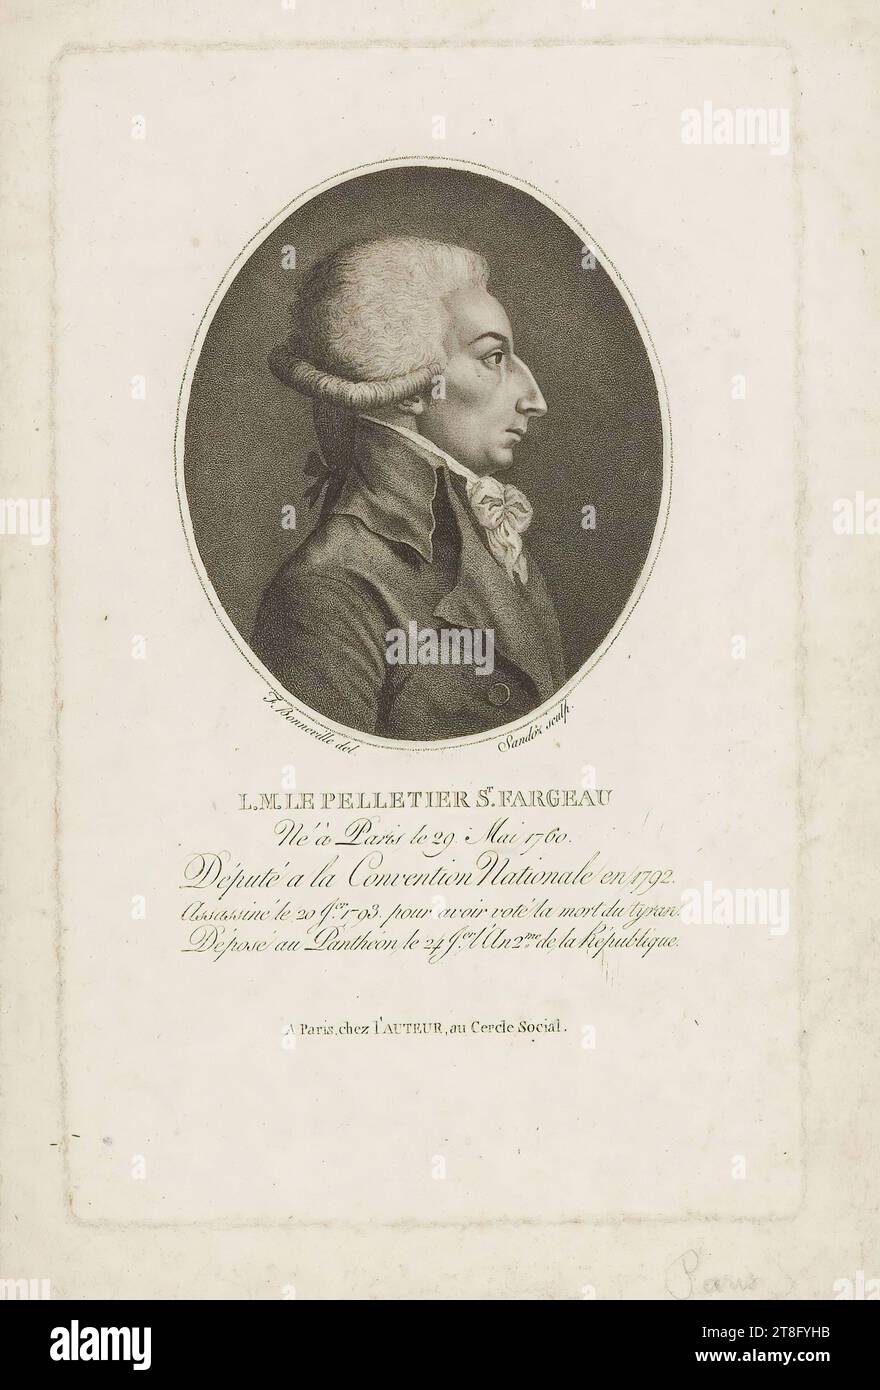 F. Bonneville del. Sandoz sculpt. L.M. LE PELLETIER ST. FARGEAU, Born in Paris on May 29, 1760, Deputy to the National Convention in 1792, Assassinated on J. 20, 1793 for having voted for the death of the tyrant, Deposed in the Pantheon on J. 24, the 2nd year of the Republic. In Paris, at the AUTHOR's, at the Cercle Social Stock Photo